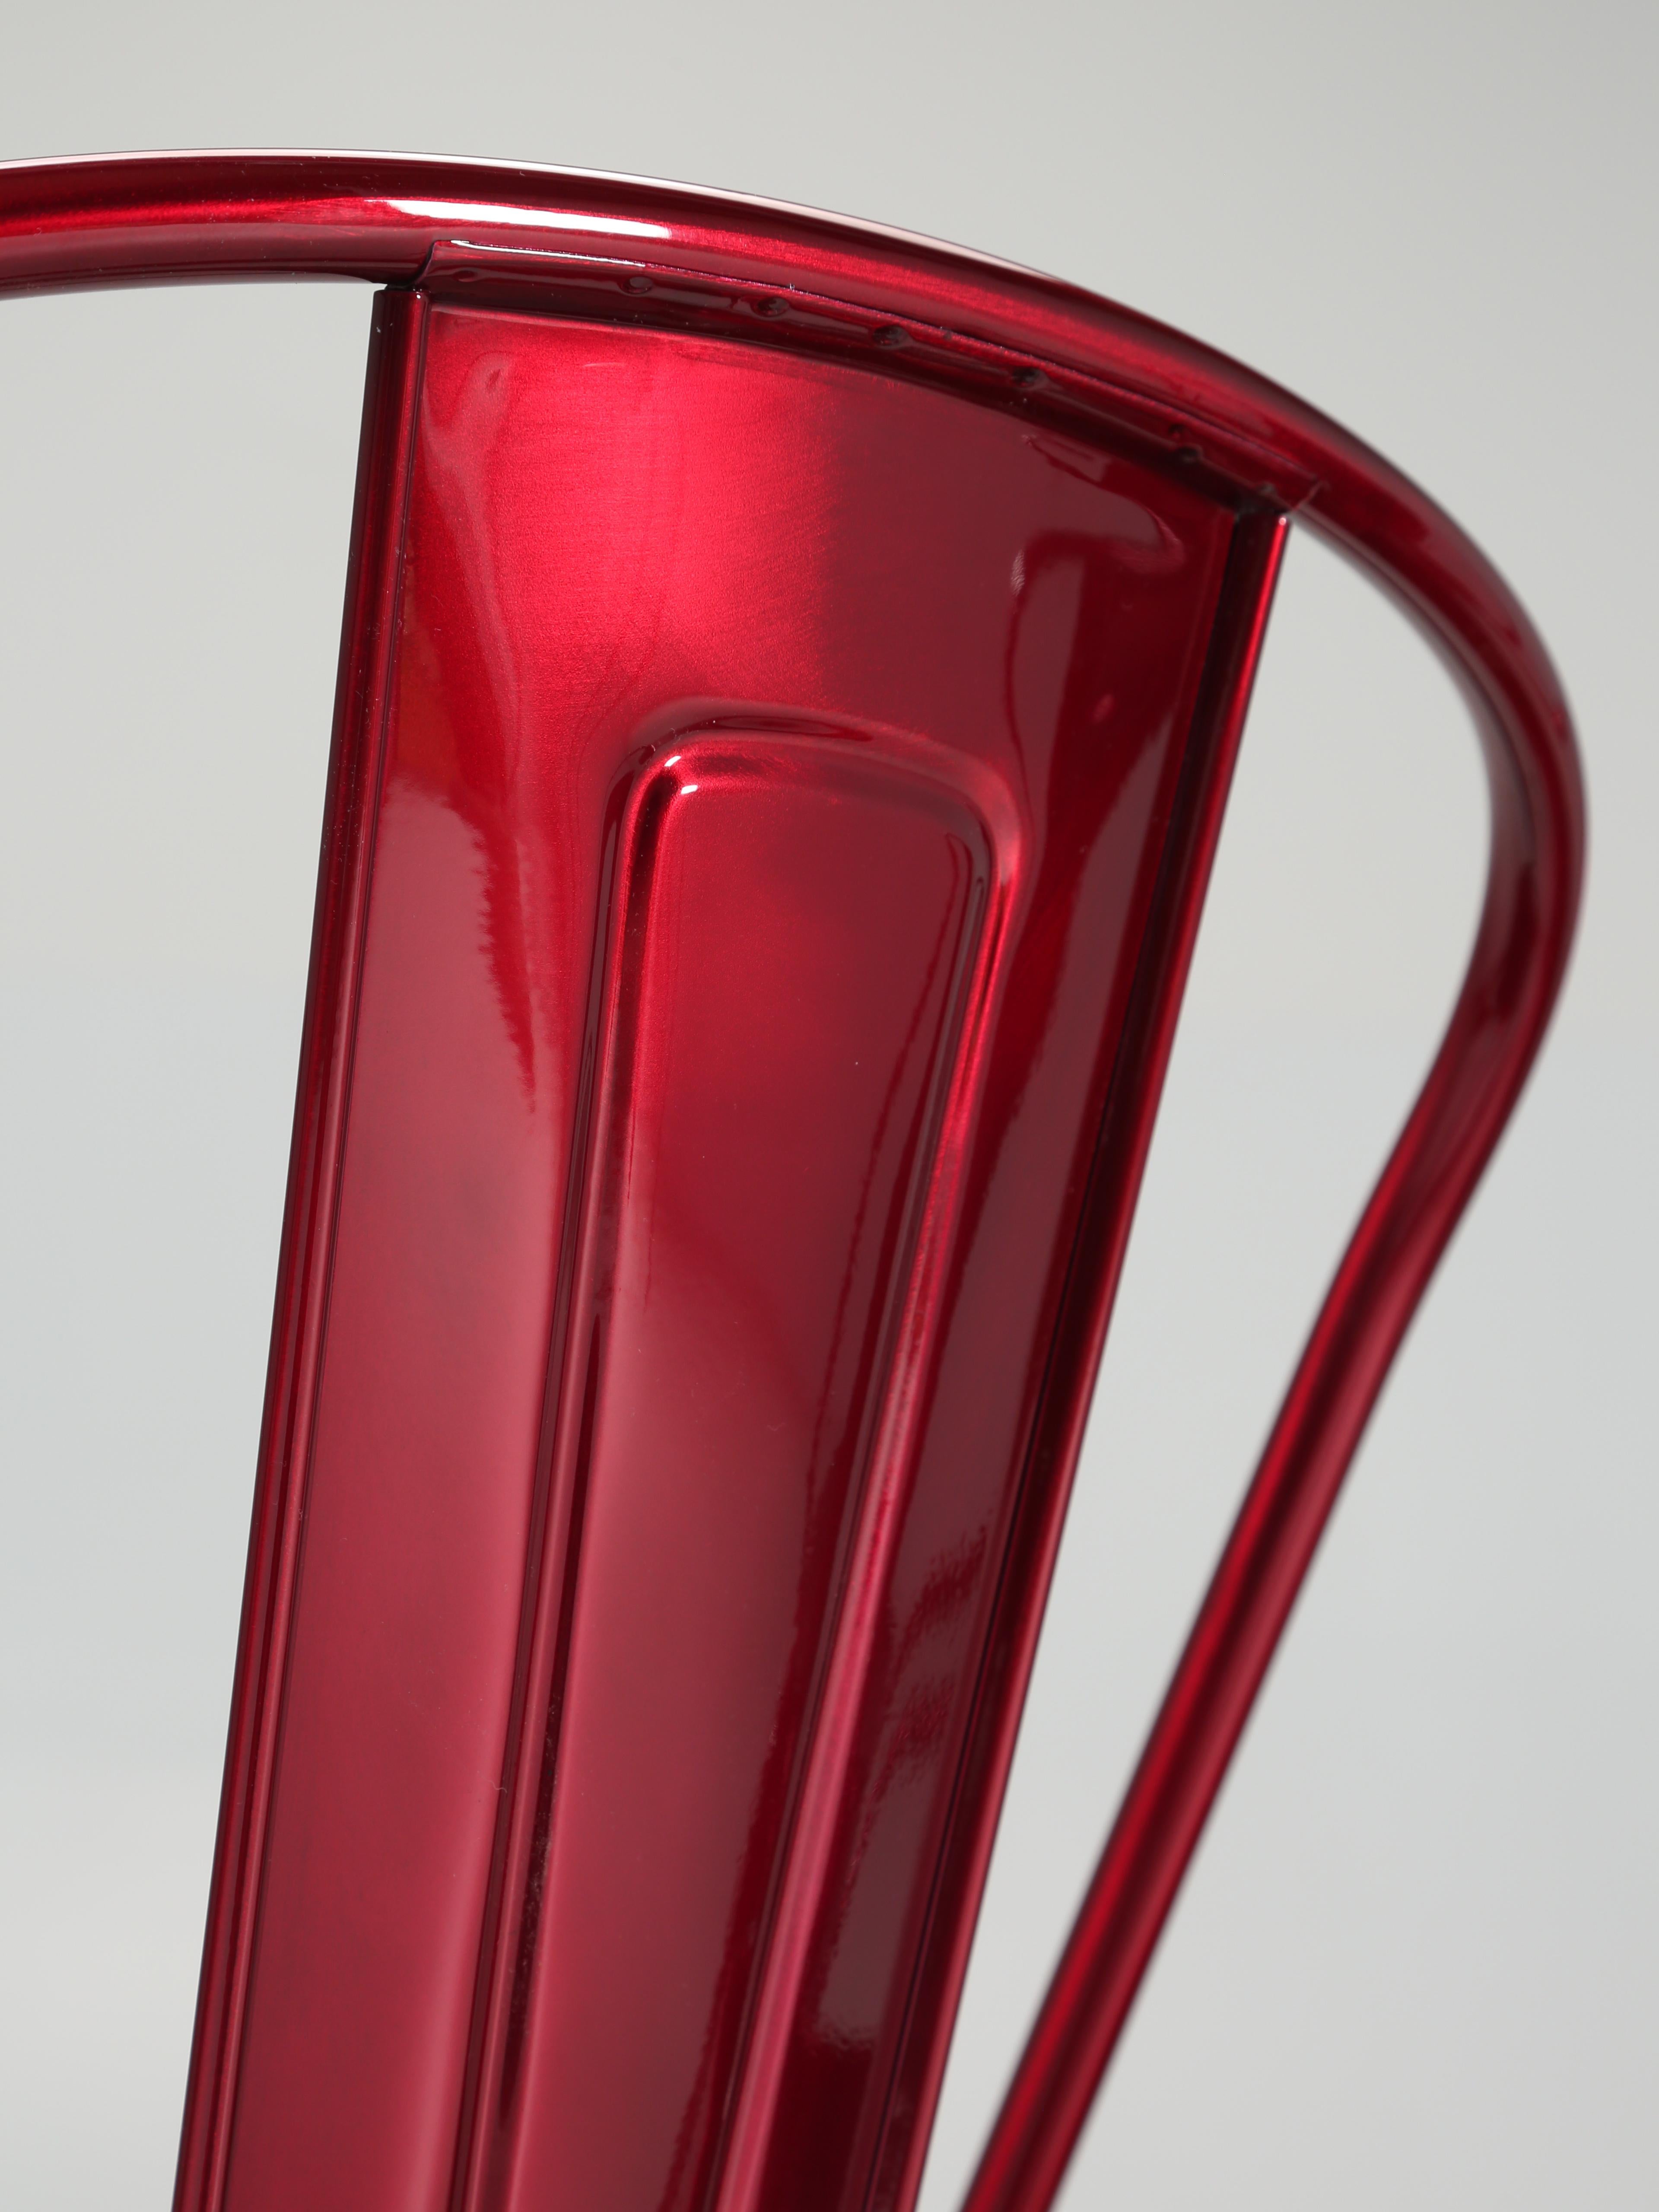 Tolix Set of (4) Steel Stacking Chairs in a Brilliant Candy Apple Red Metallic 1